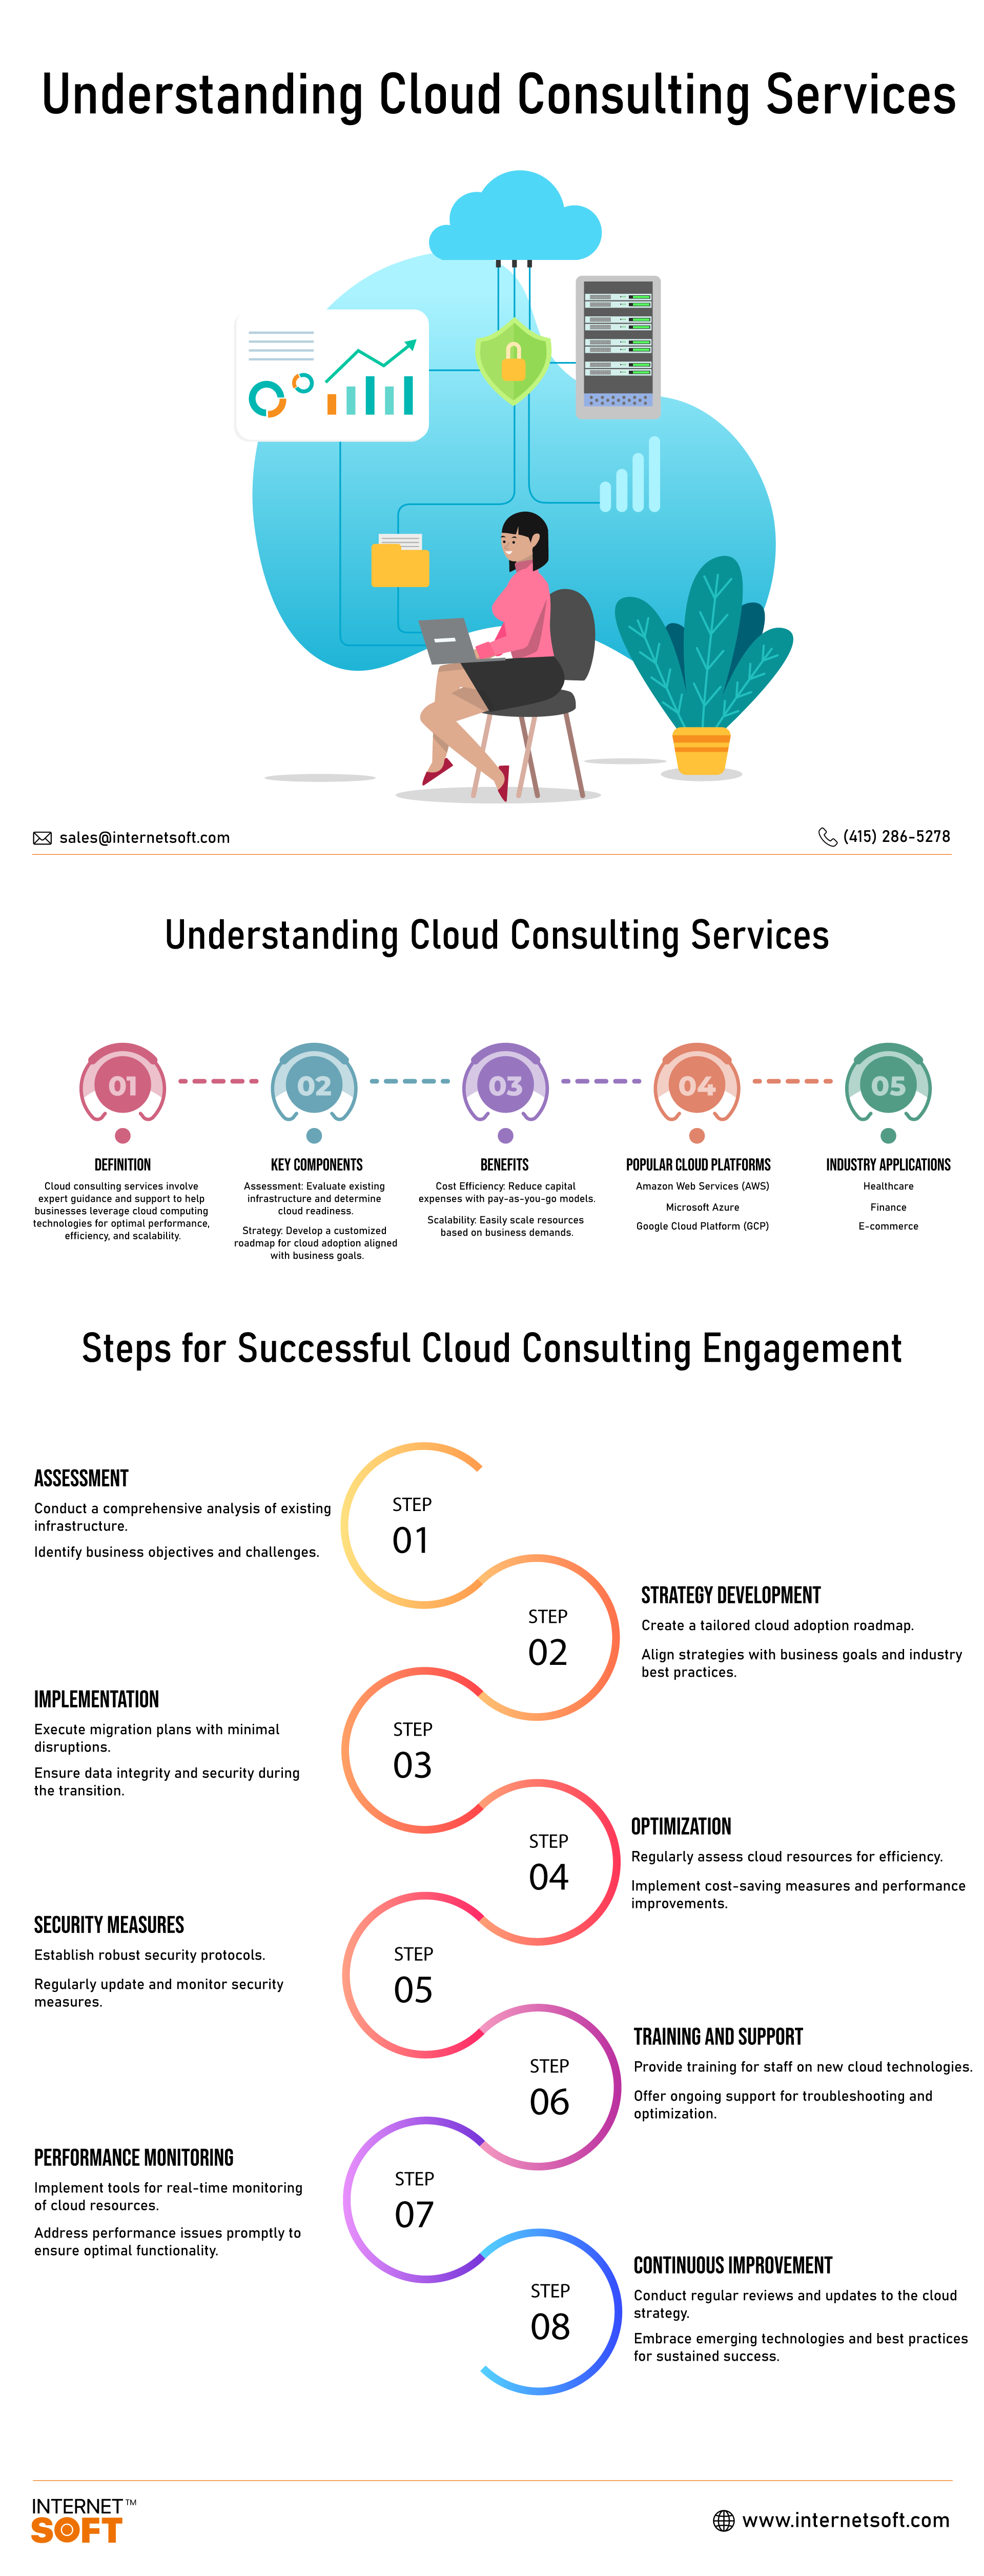 Understanding Cloud Consulting Services